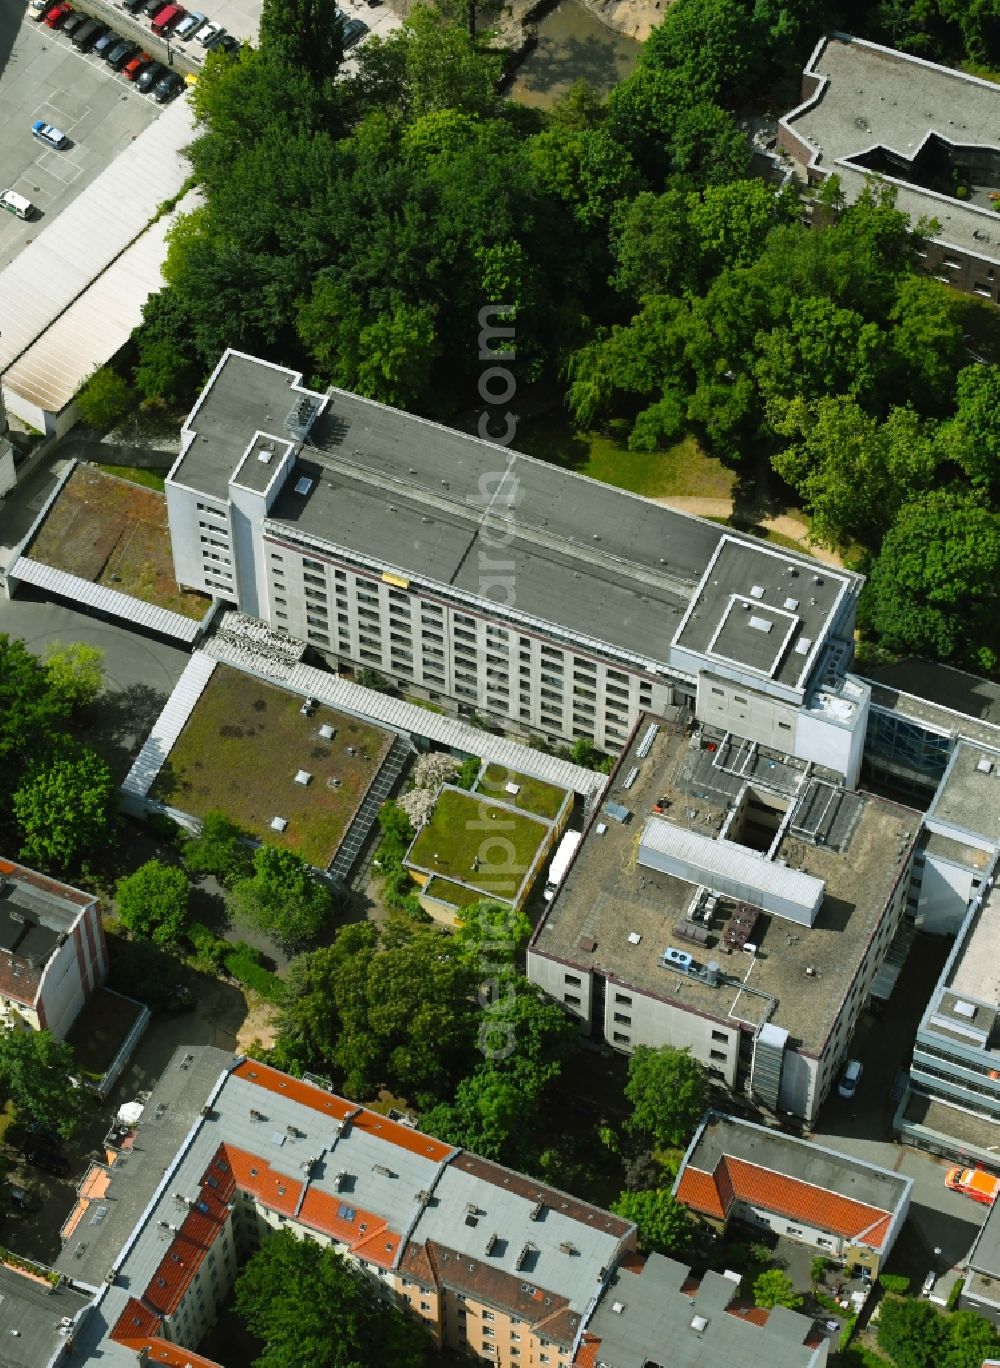 Berlin from the bird's eye view: Hospital grounds of the Clinic Maria Heimsuchung Caritas Klinik Pankow on Breite Strasse in the district Pankow in Berlin, Germany